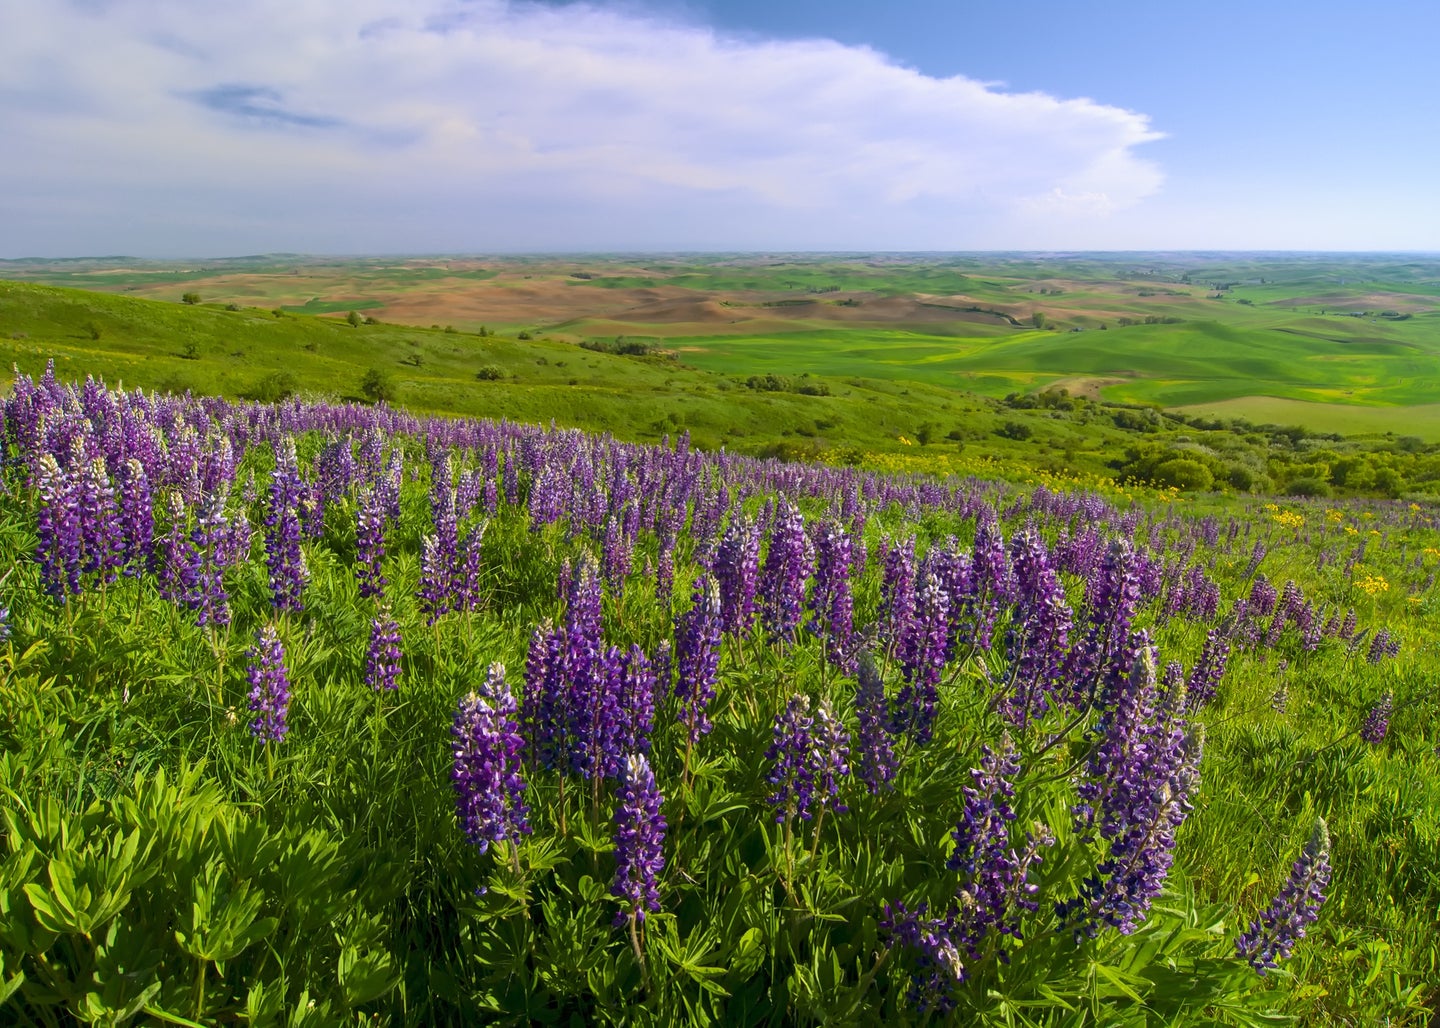 Purple lupine native wildflowers at Steptoe Butte State Park in Washington